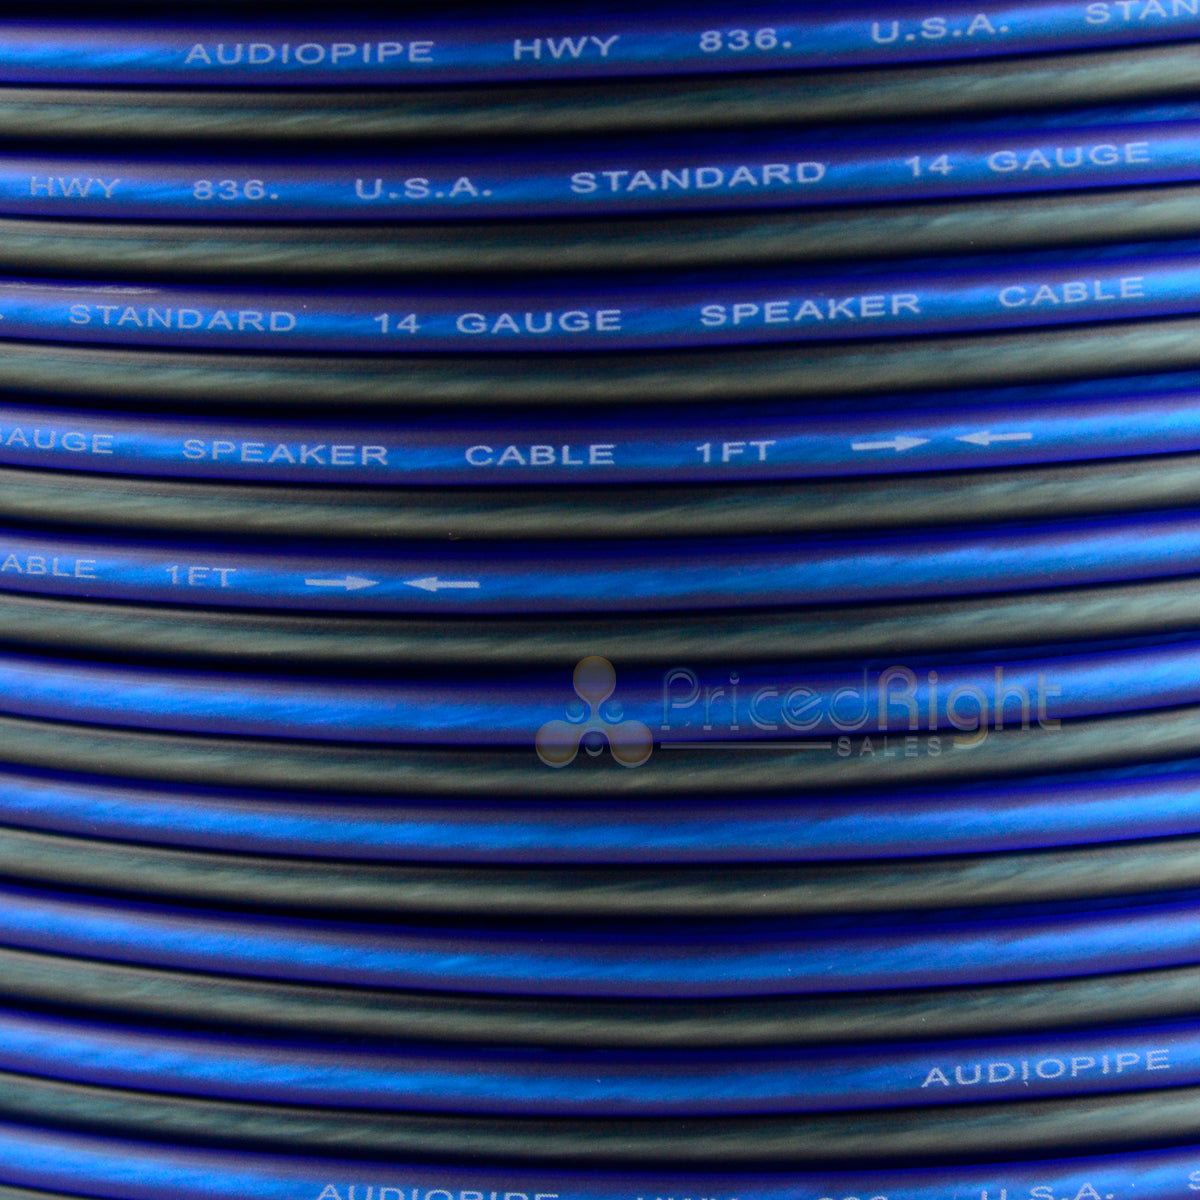 5 FT 14 GA Gauge Blue and Black Speaker Wire Cable Car Home Audio Flexible